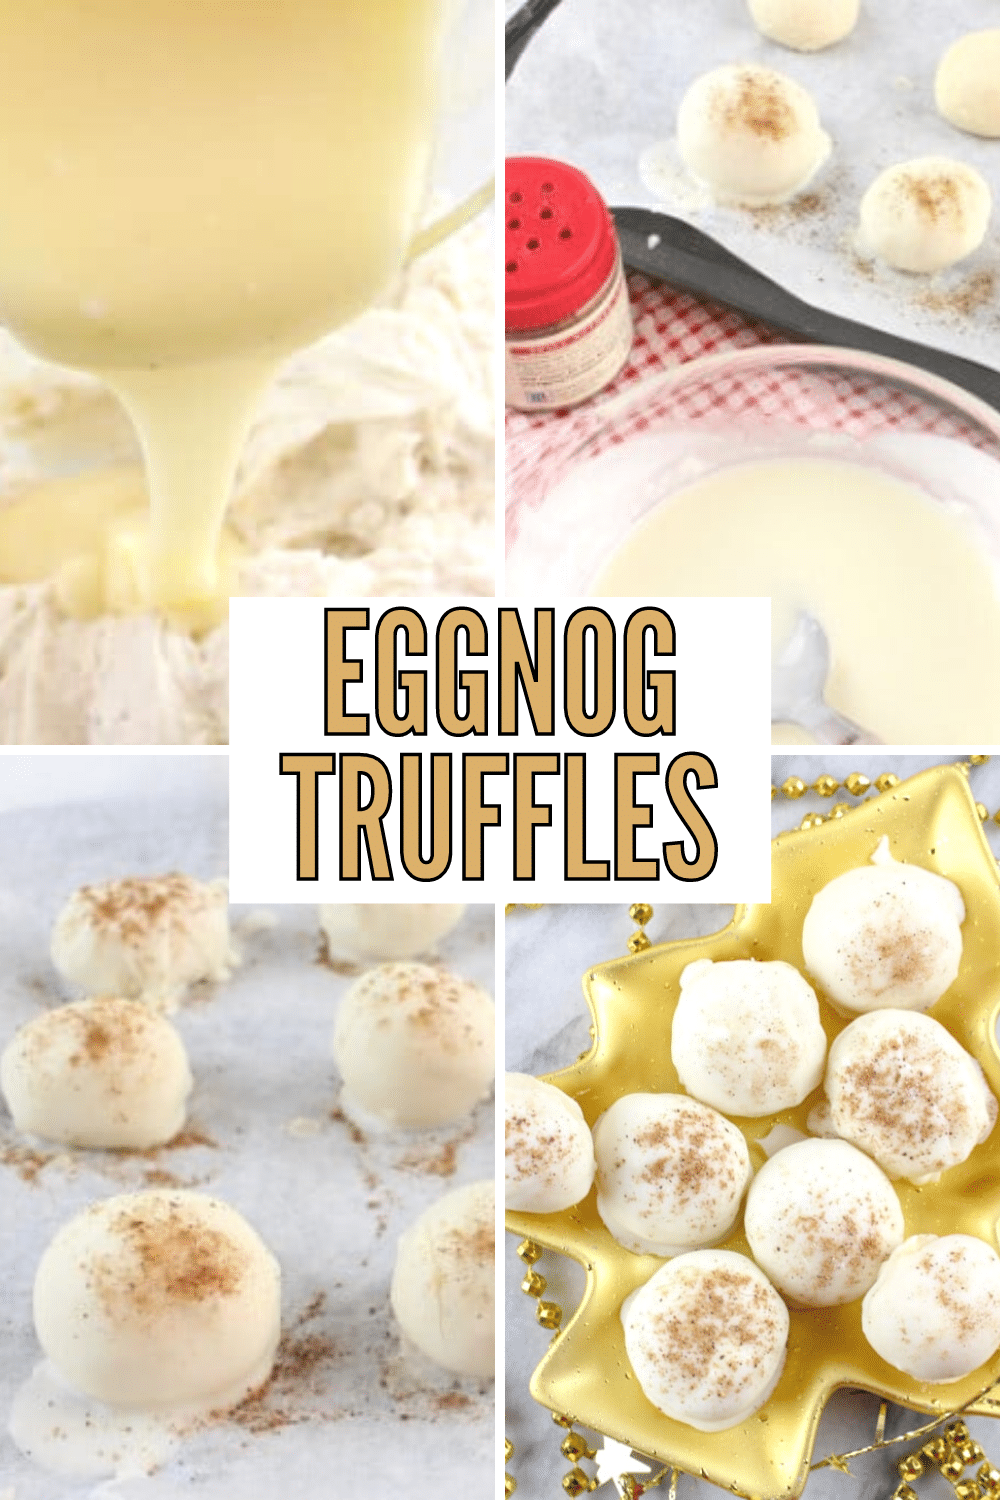 These eggnog truffles are so yummy and perfect for Christmas! Give them as a gift or serve at your holiday party. #Christmas #candy #eggnog via @wondermomwannab